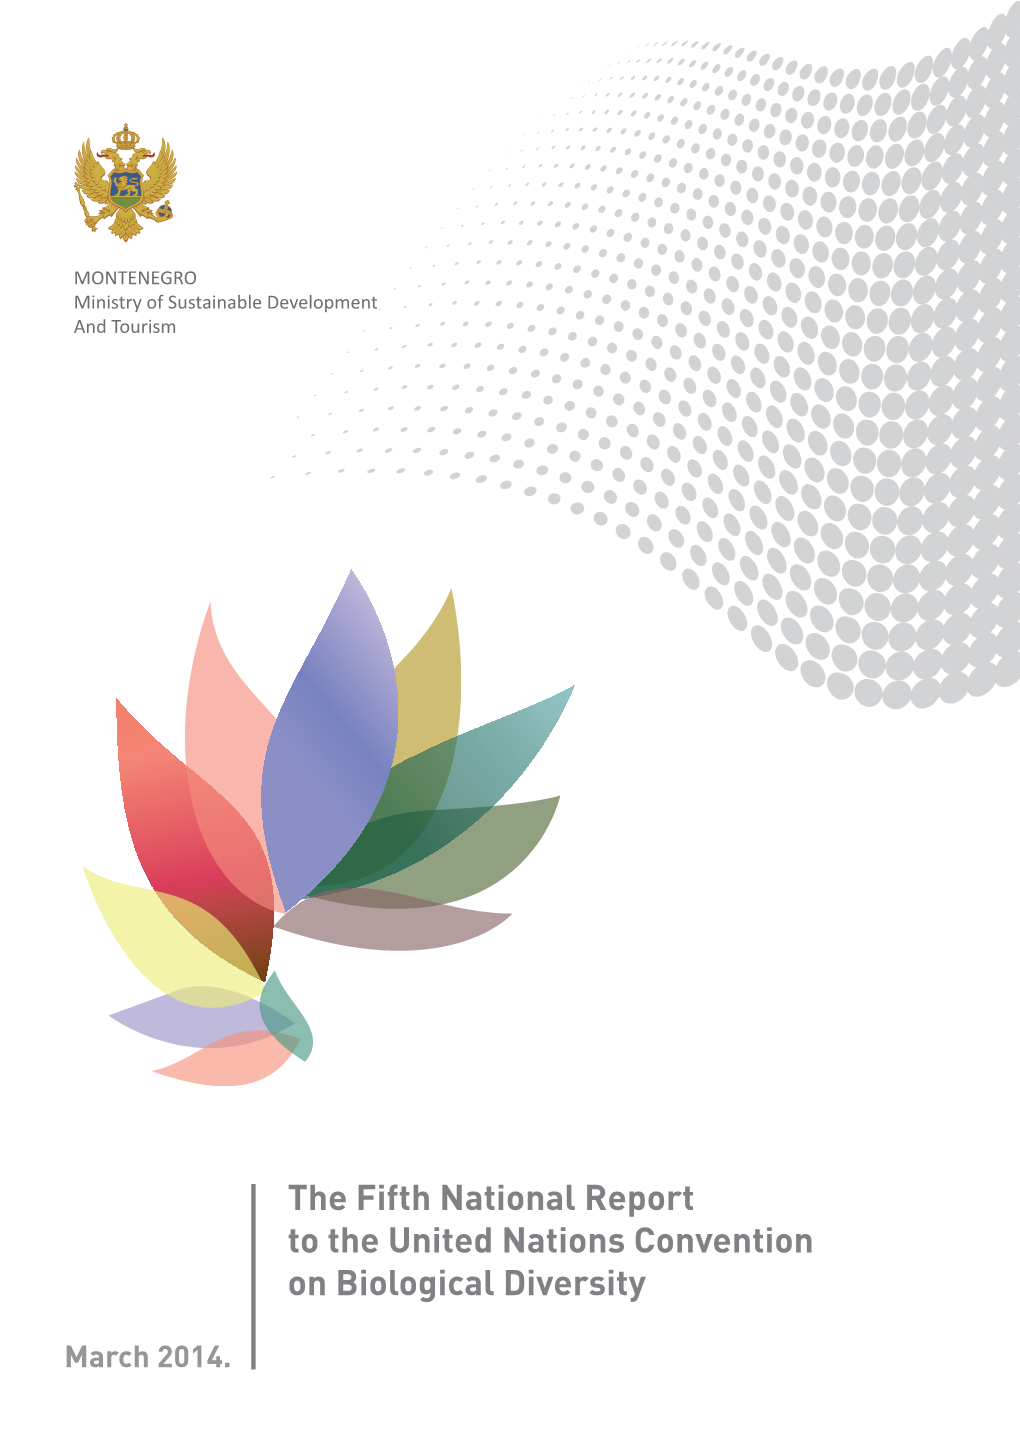 The Fifth National Report to the United Nations Convention on Biological Diversity